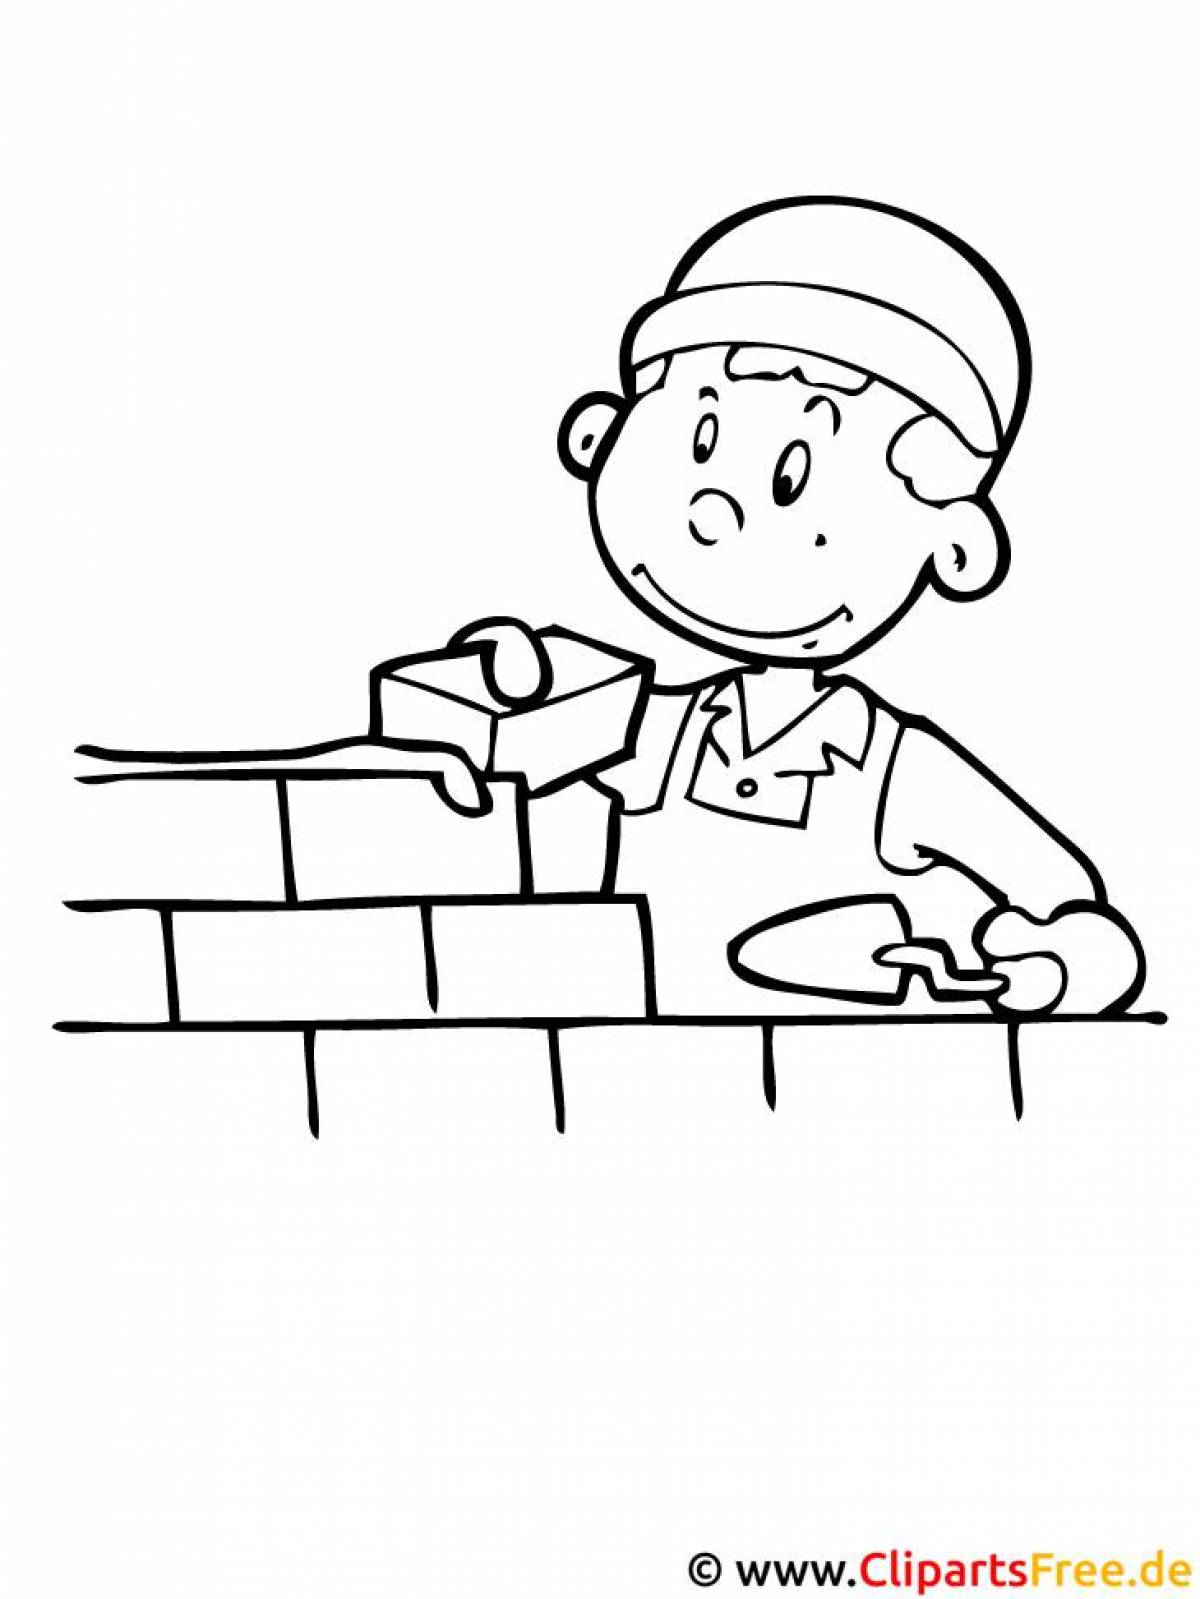 Colorful occupations coloring pages for children 4-5 years old